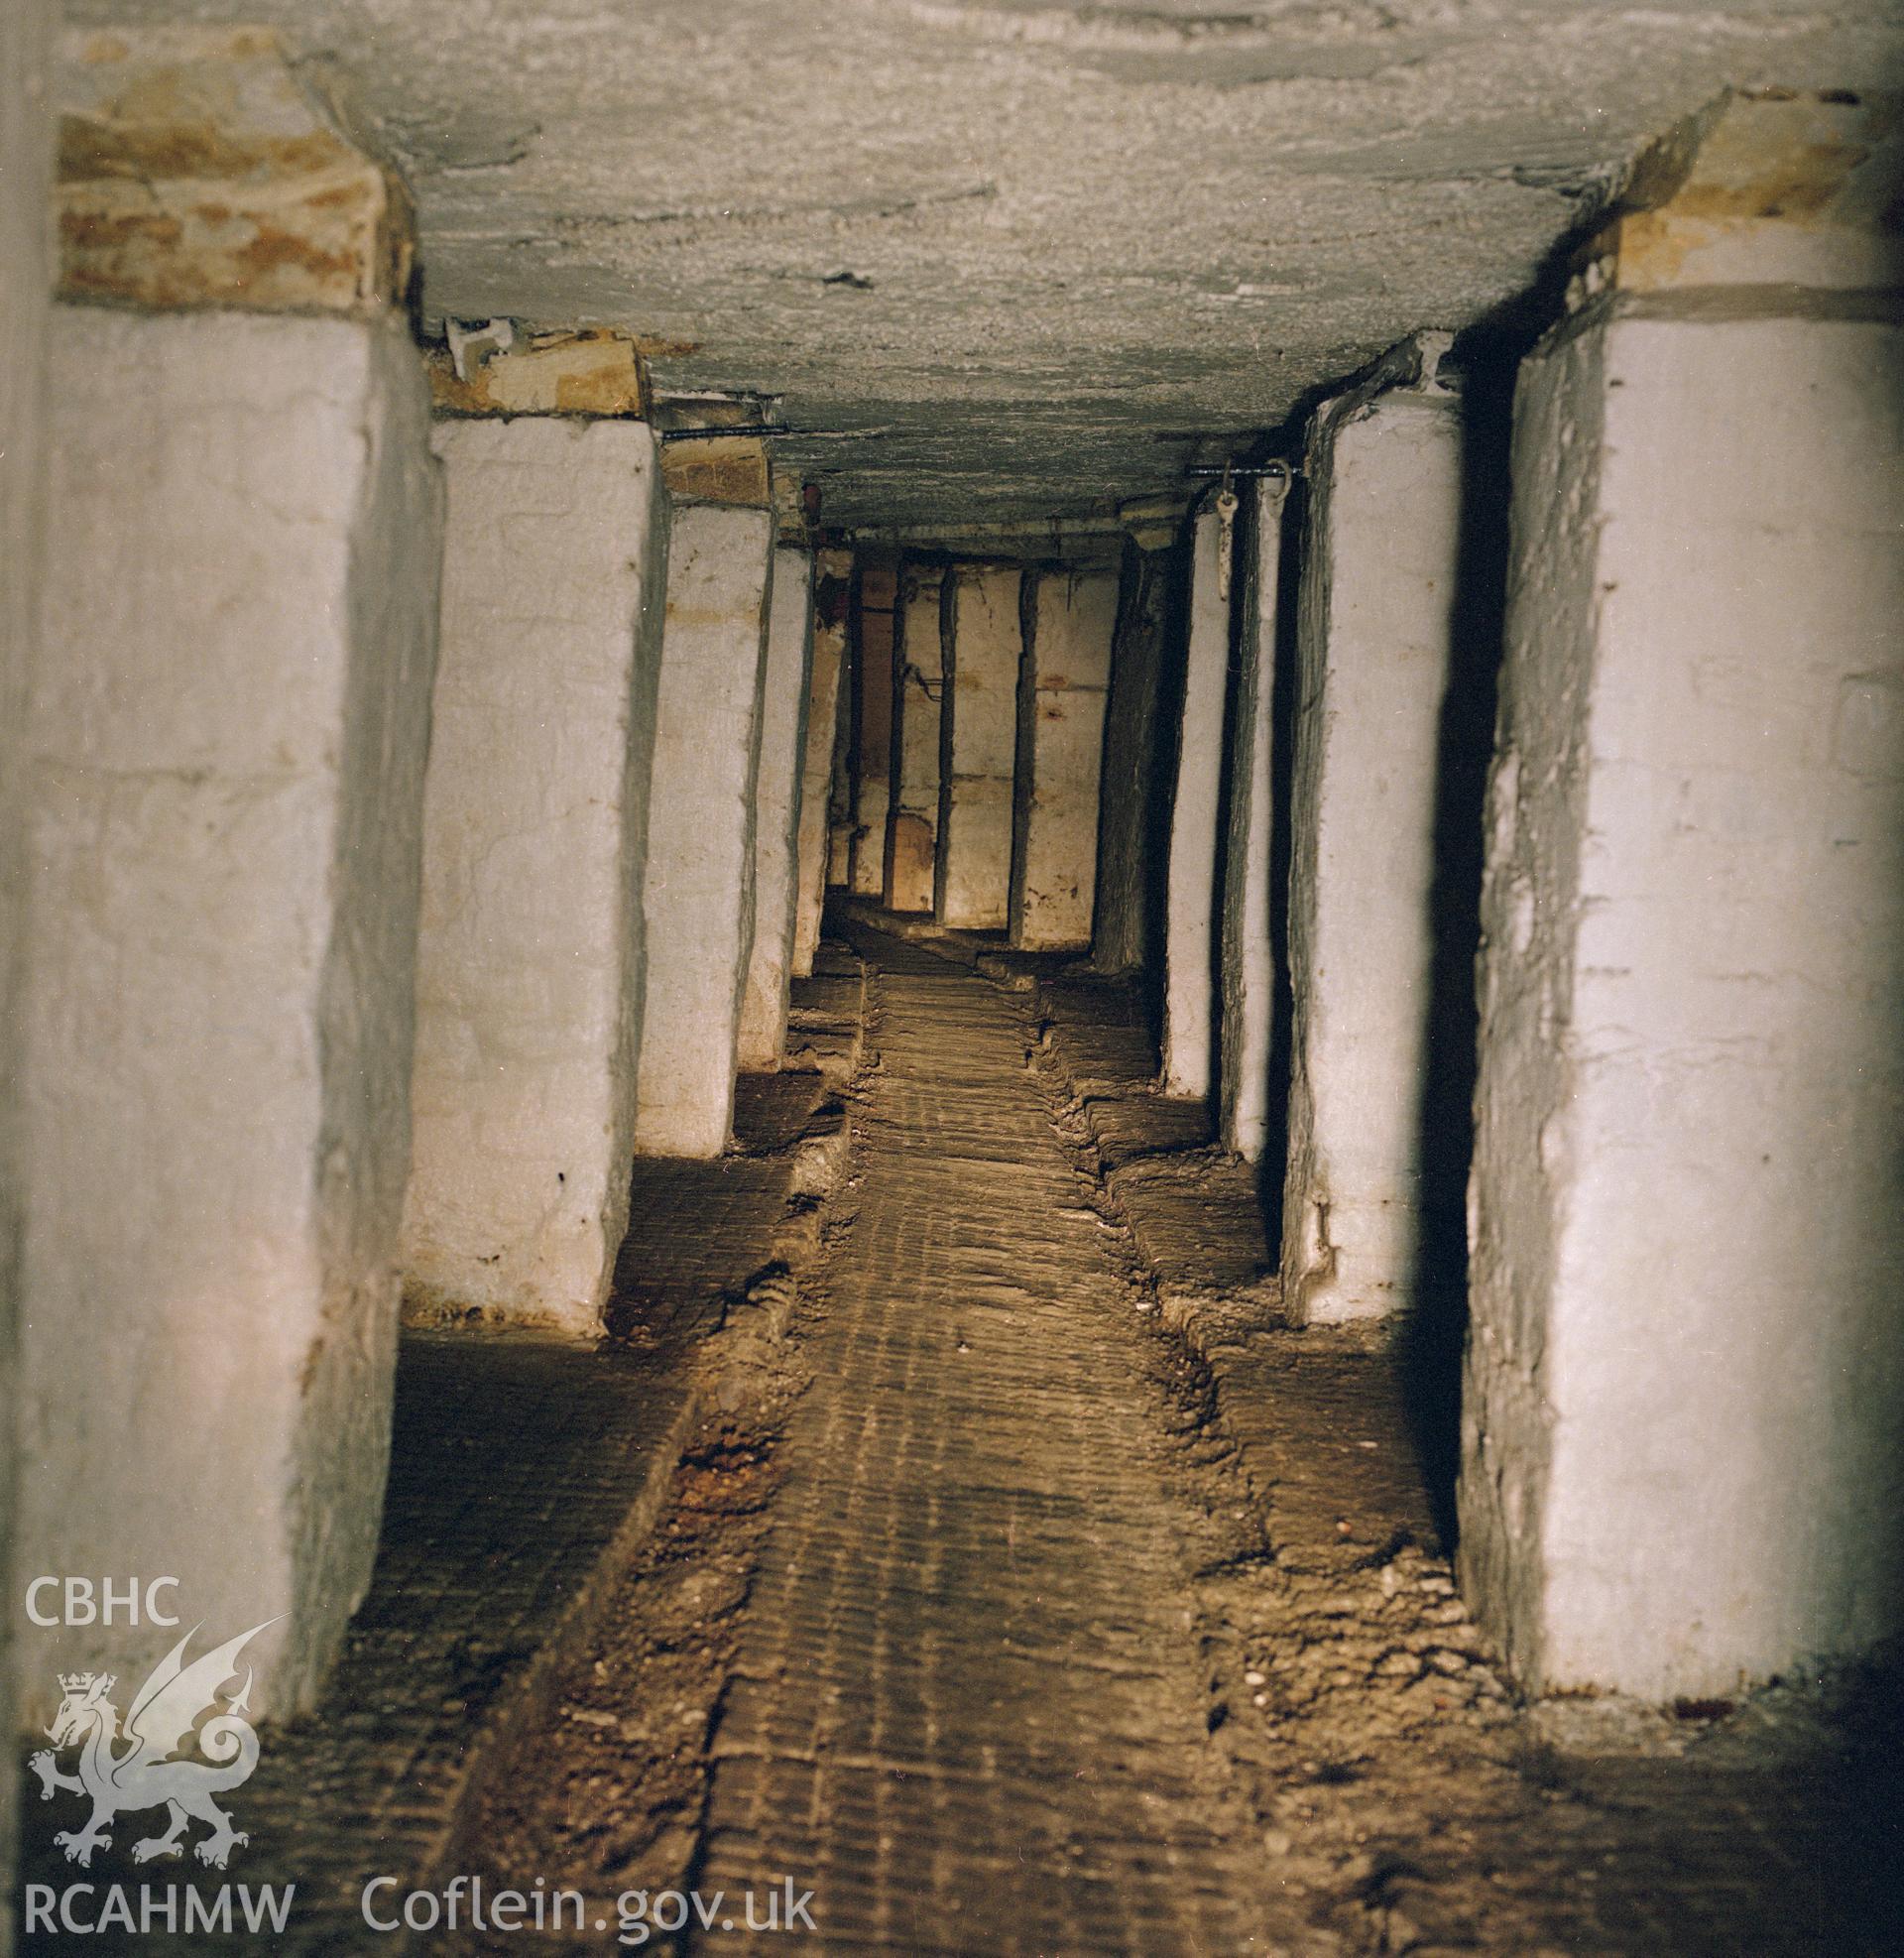 Digital copy of an acetate negative showing underground stables at Big Pit, from the John Cornwell Collection.